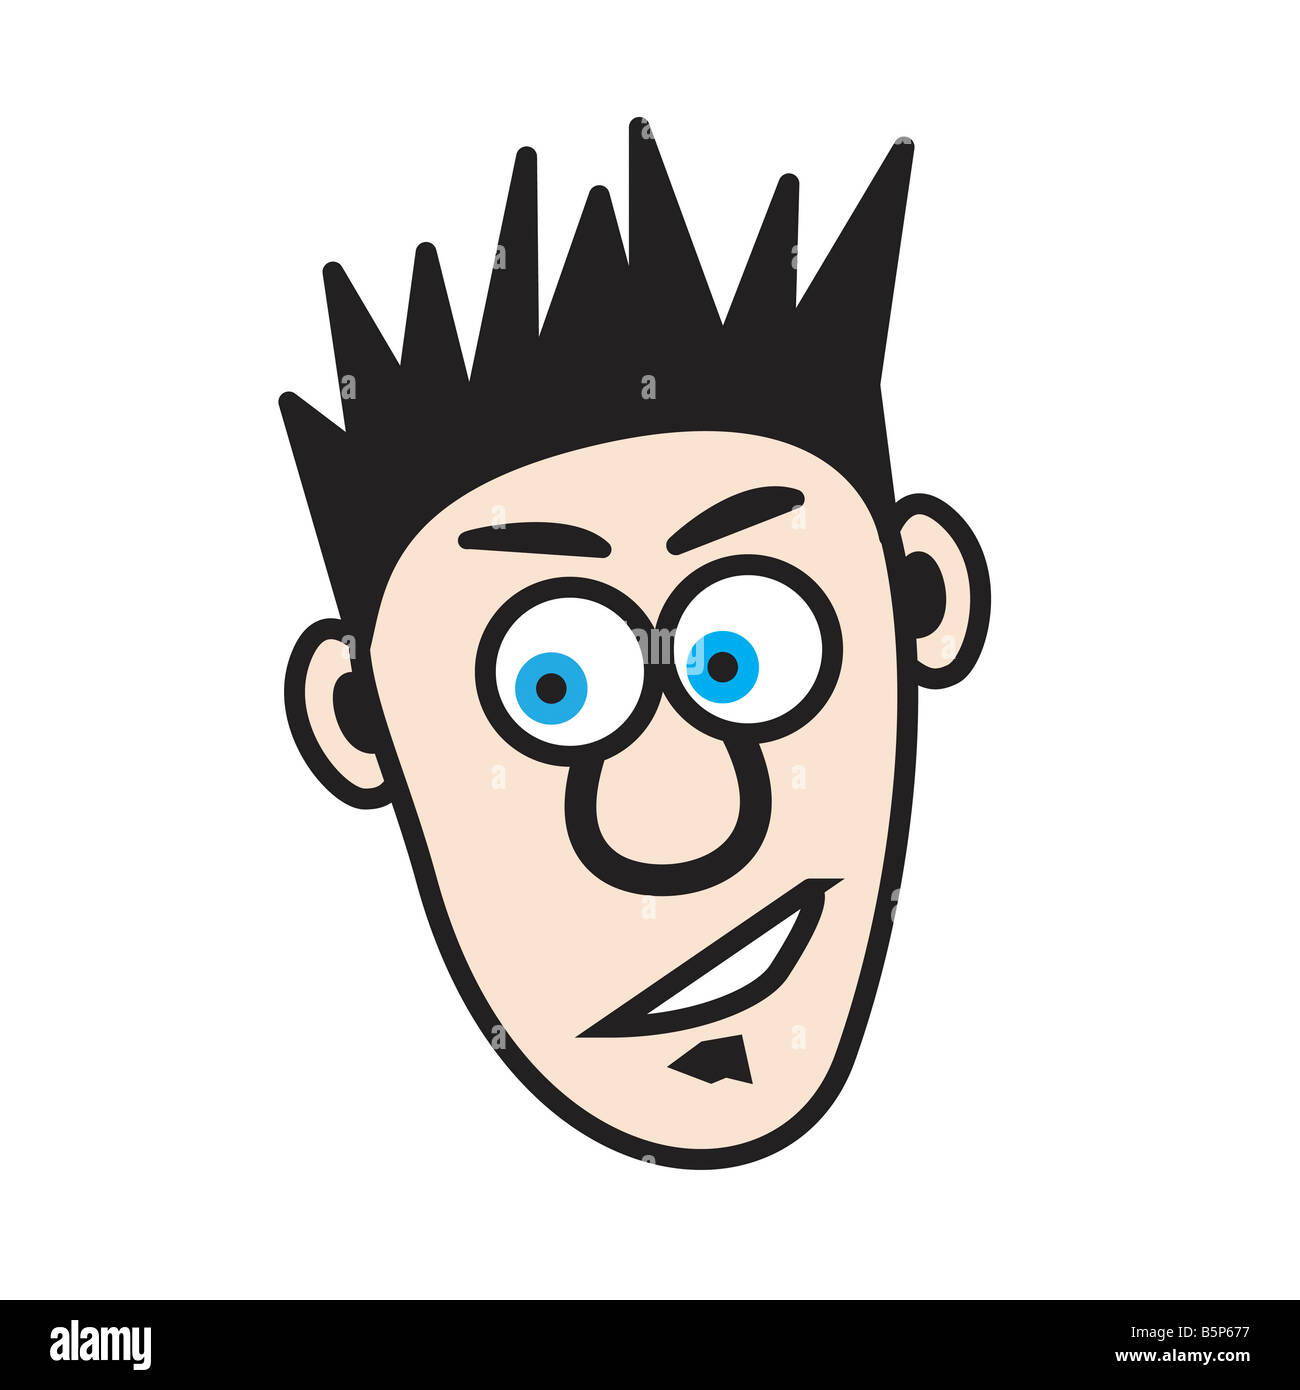 Illustration of a young cartoon man that has spiked hair and a soul patch Stock Photo